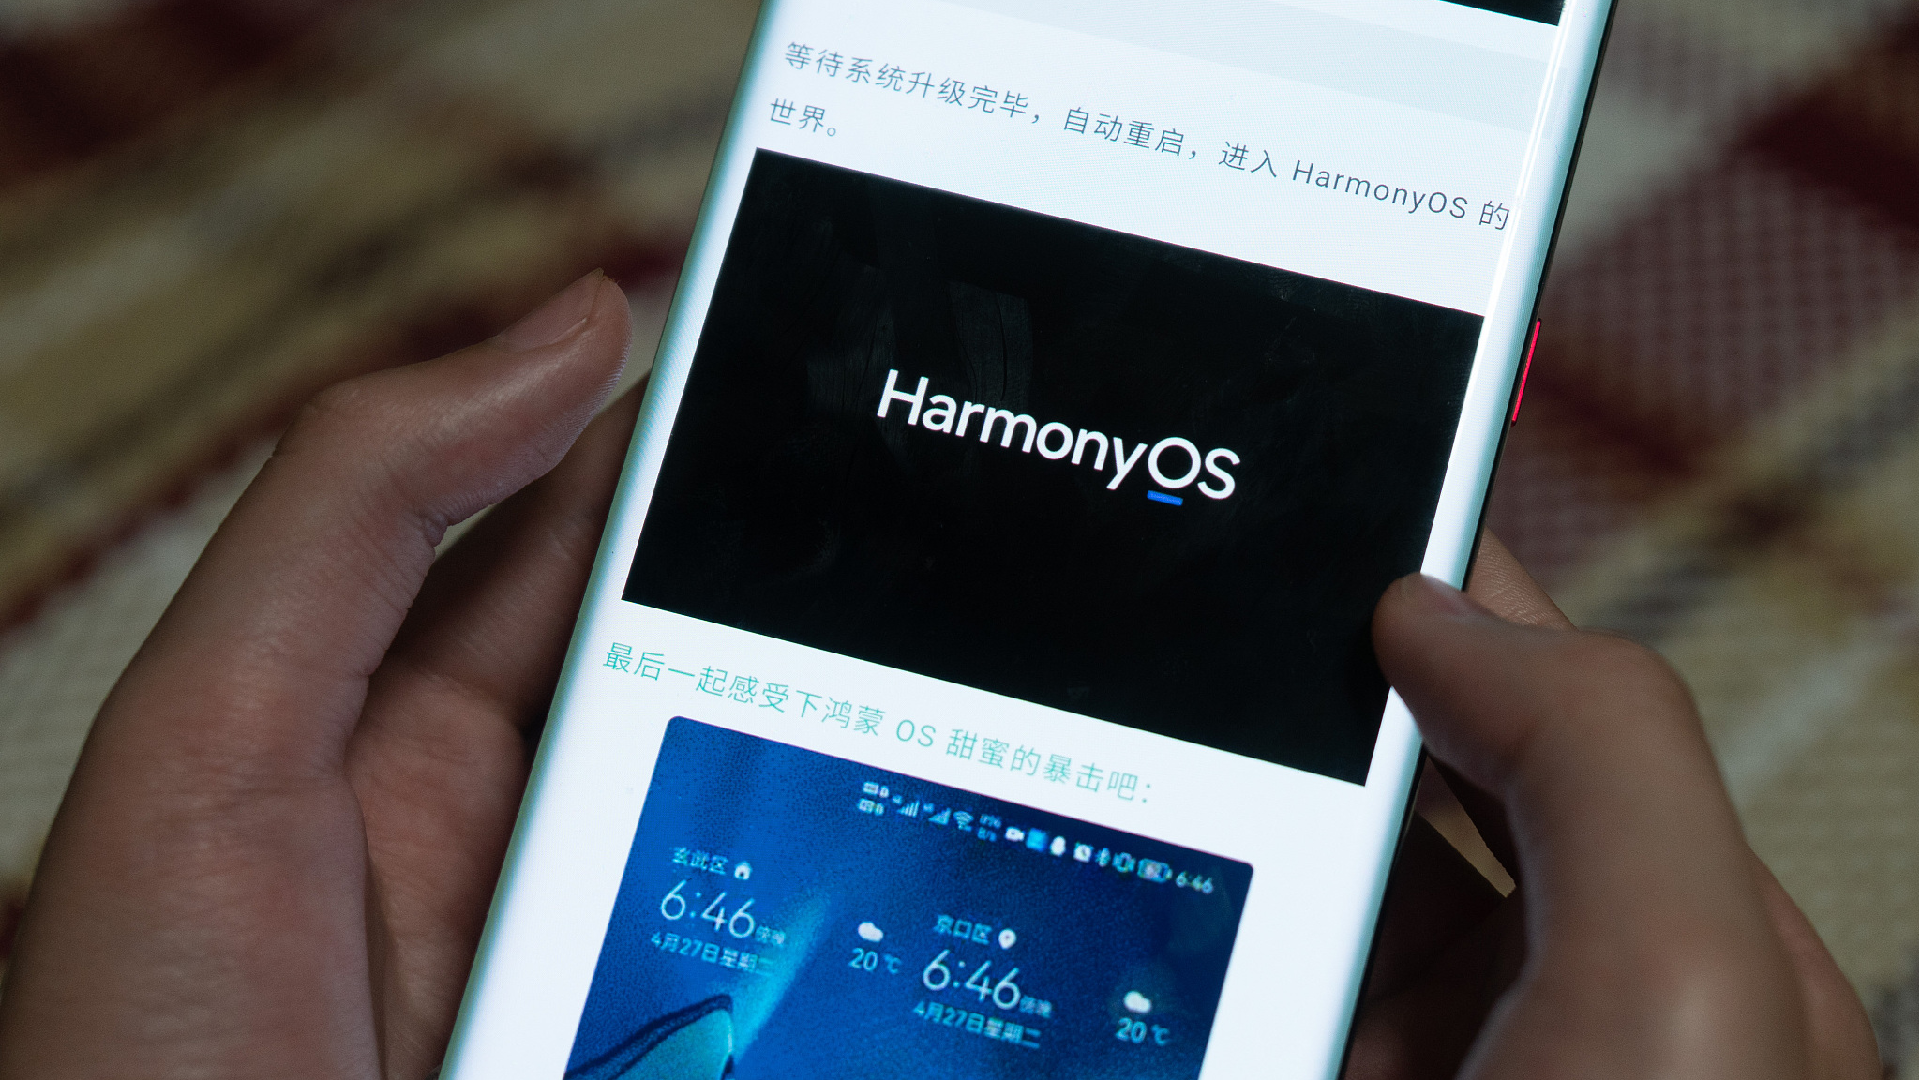 Chinese telecom giant Huawei will officially launch its new operating system HarmonyOS for smartphones on June 2, the company said Tuesday. HarmonyOS,